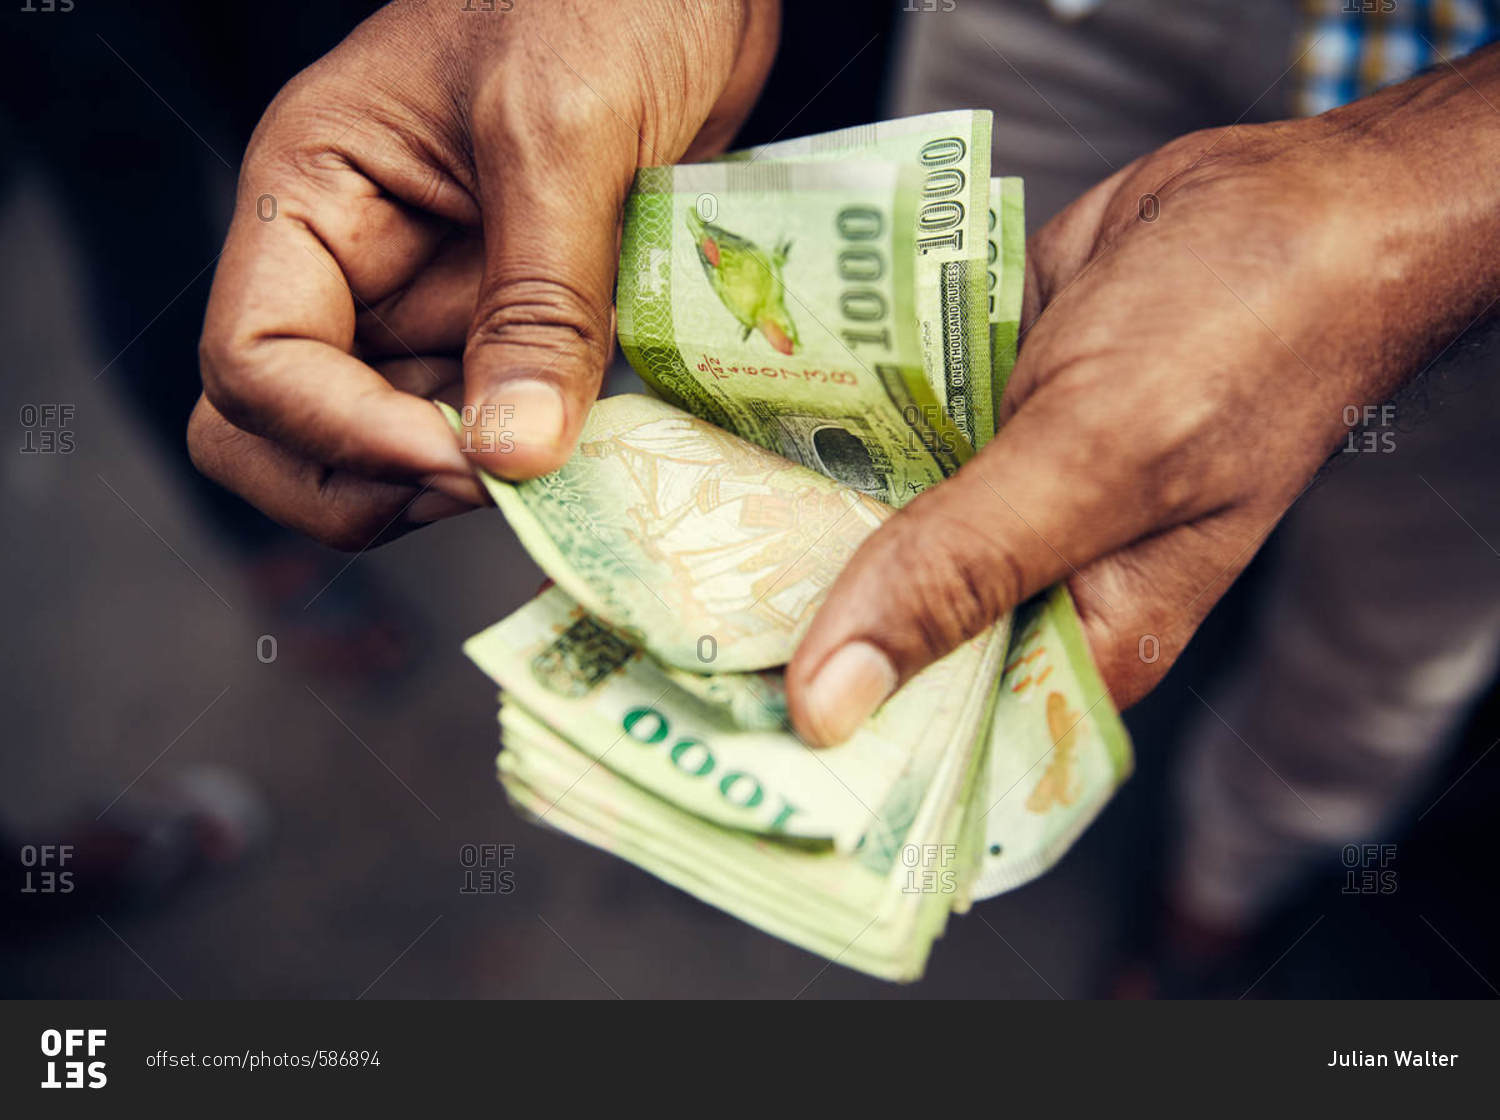 Person counting money in Sri Lanka